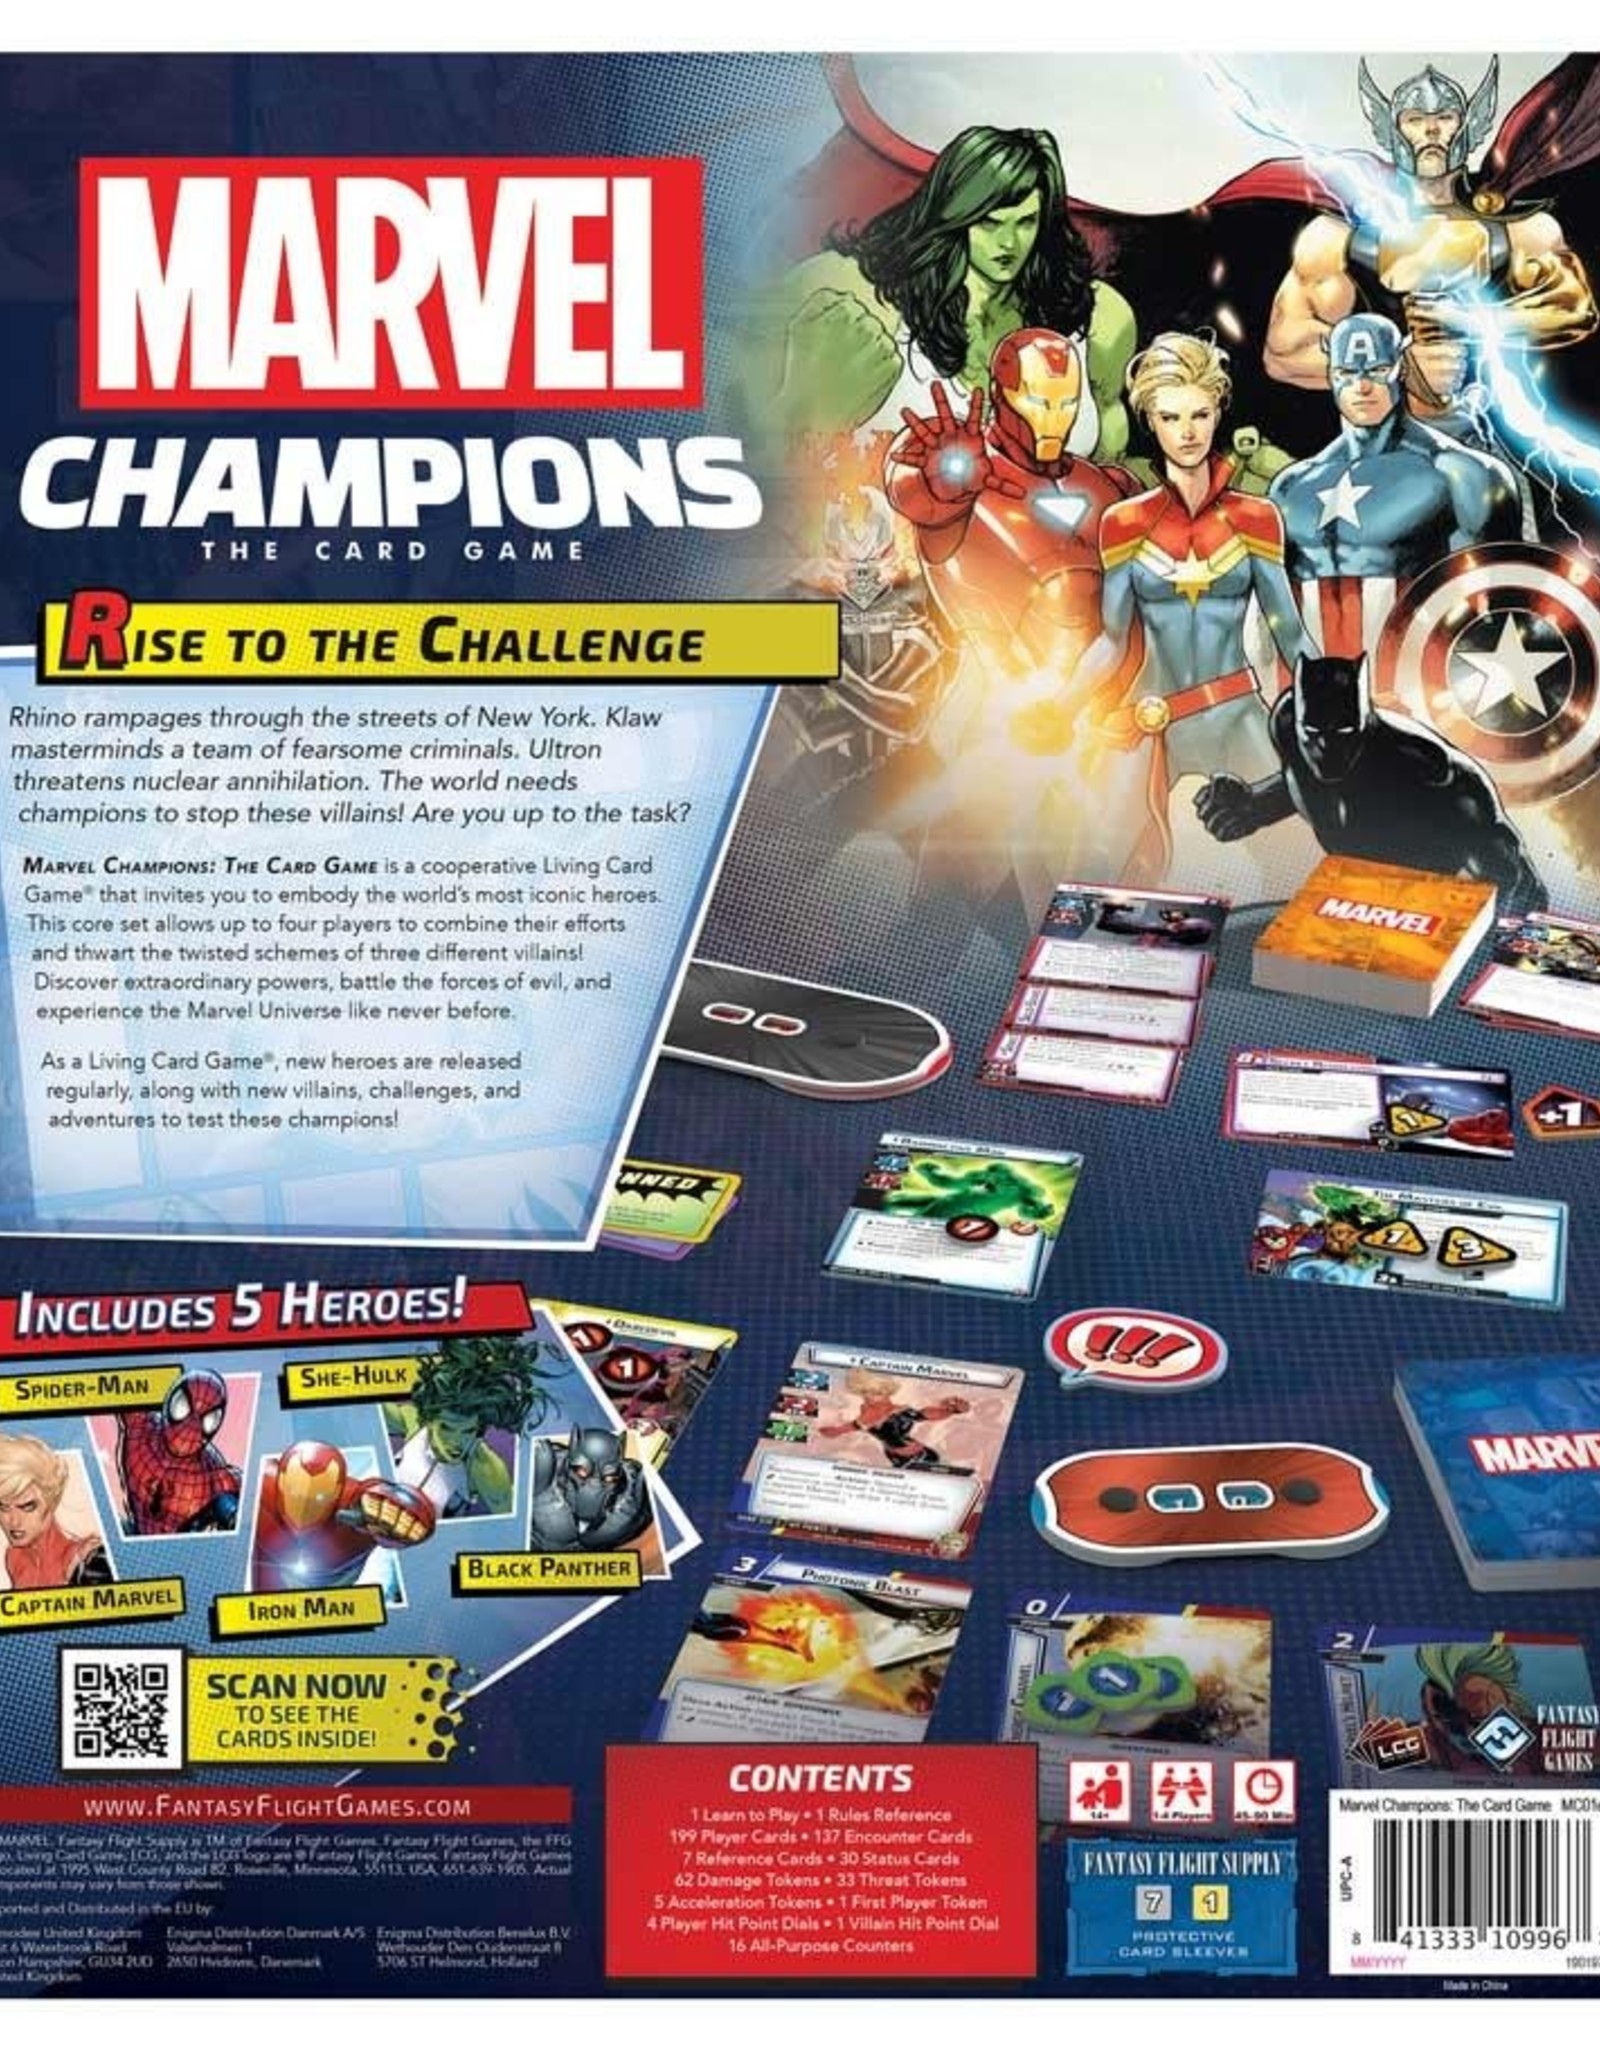 Fantasy Flight Games Marvel Champions: The Card Game Core Set